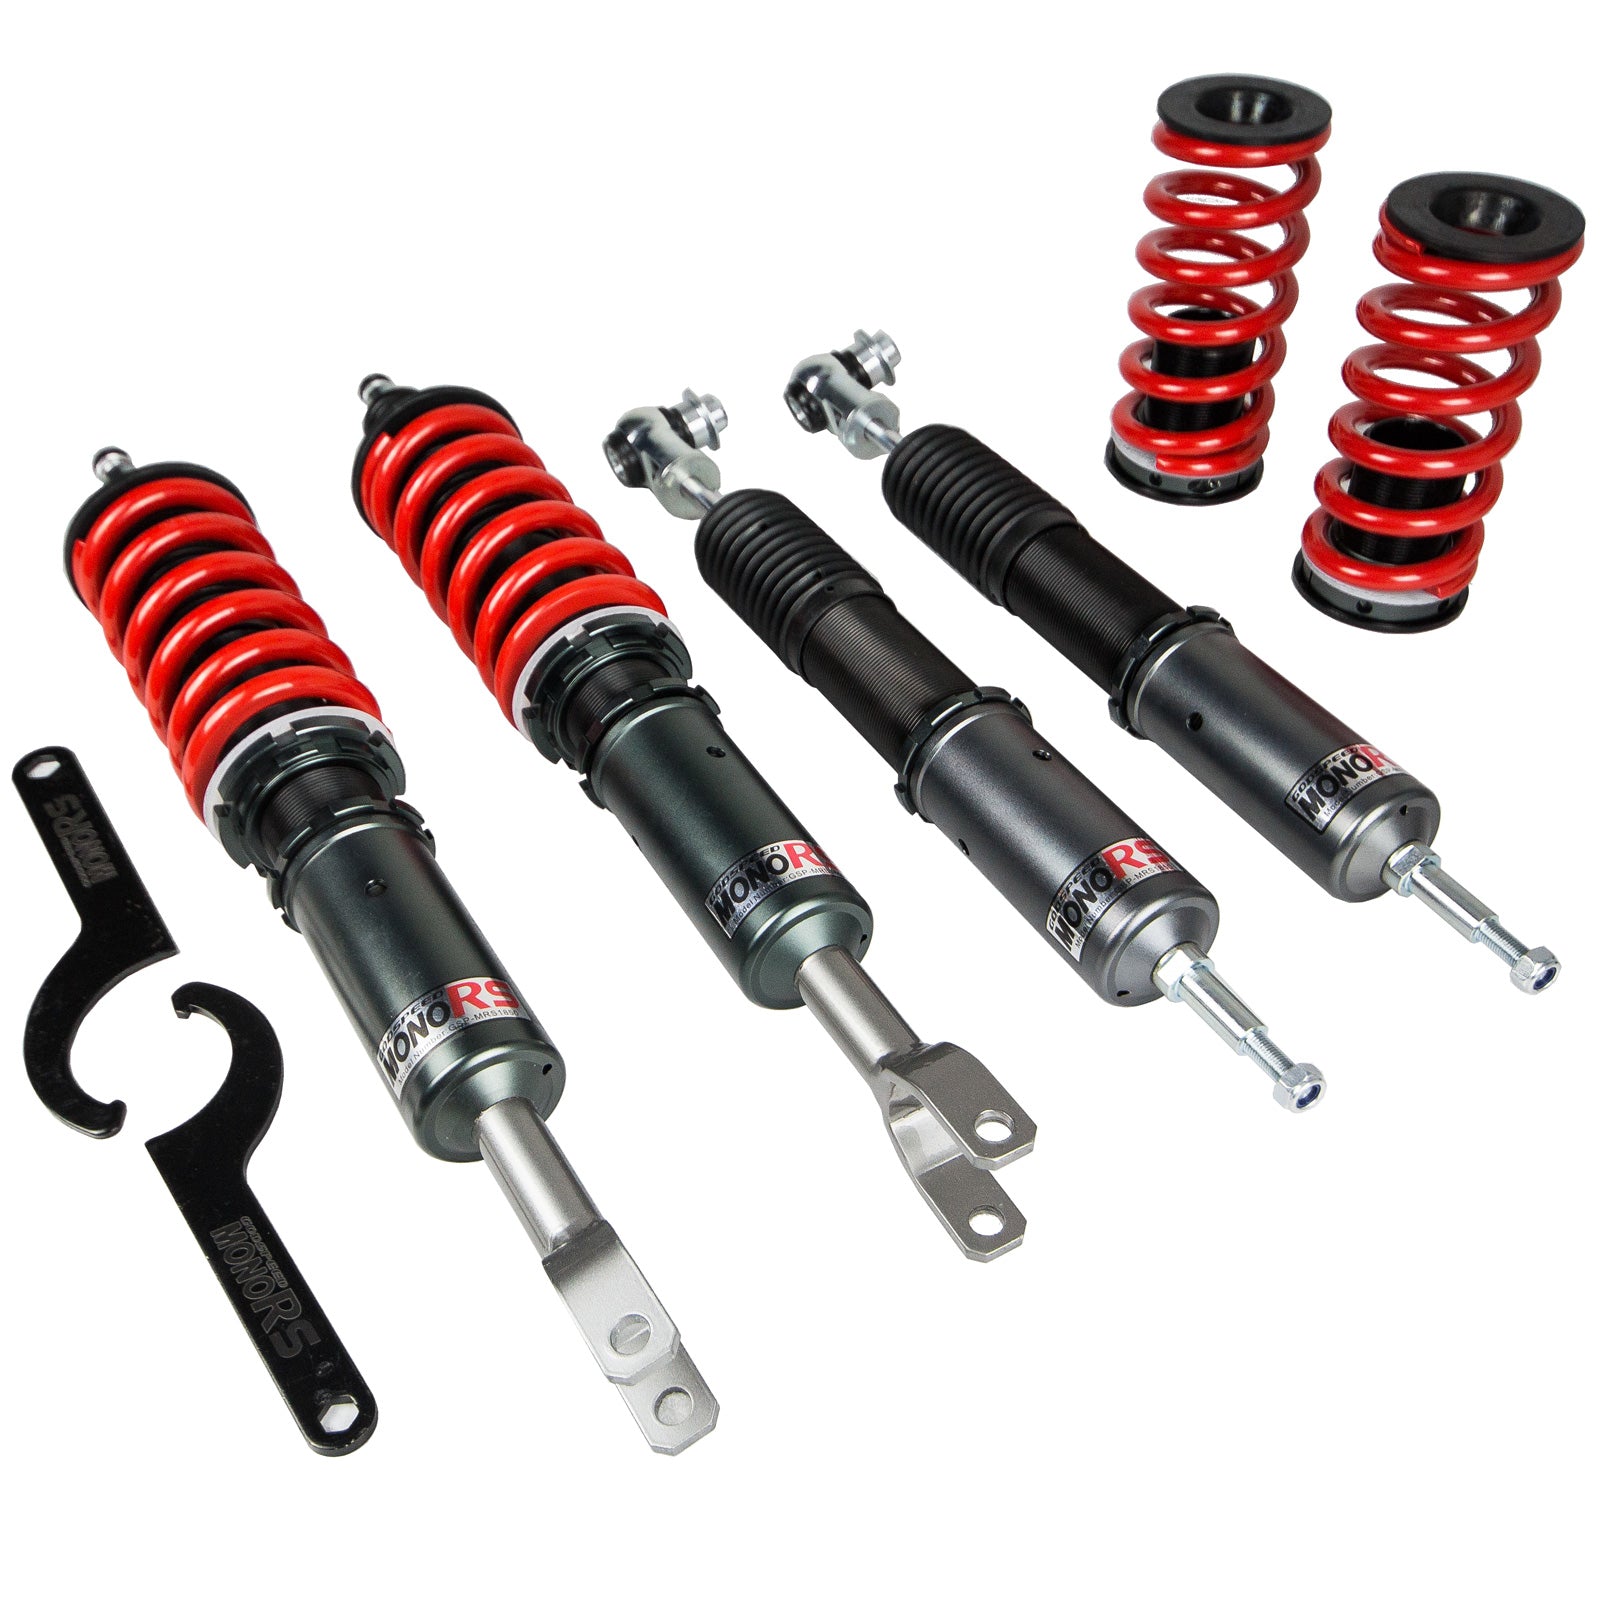 Godspeed MRS1850-A MonoRS Coilover Lowering Kit, 32 Damping Adjustment, Ride Height Adjustable